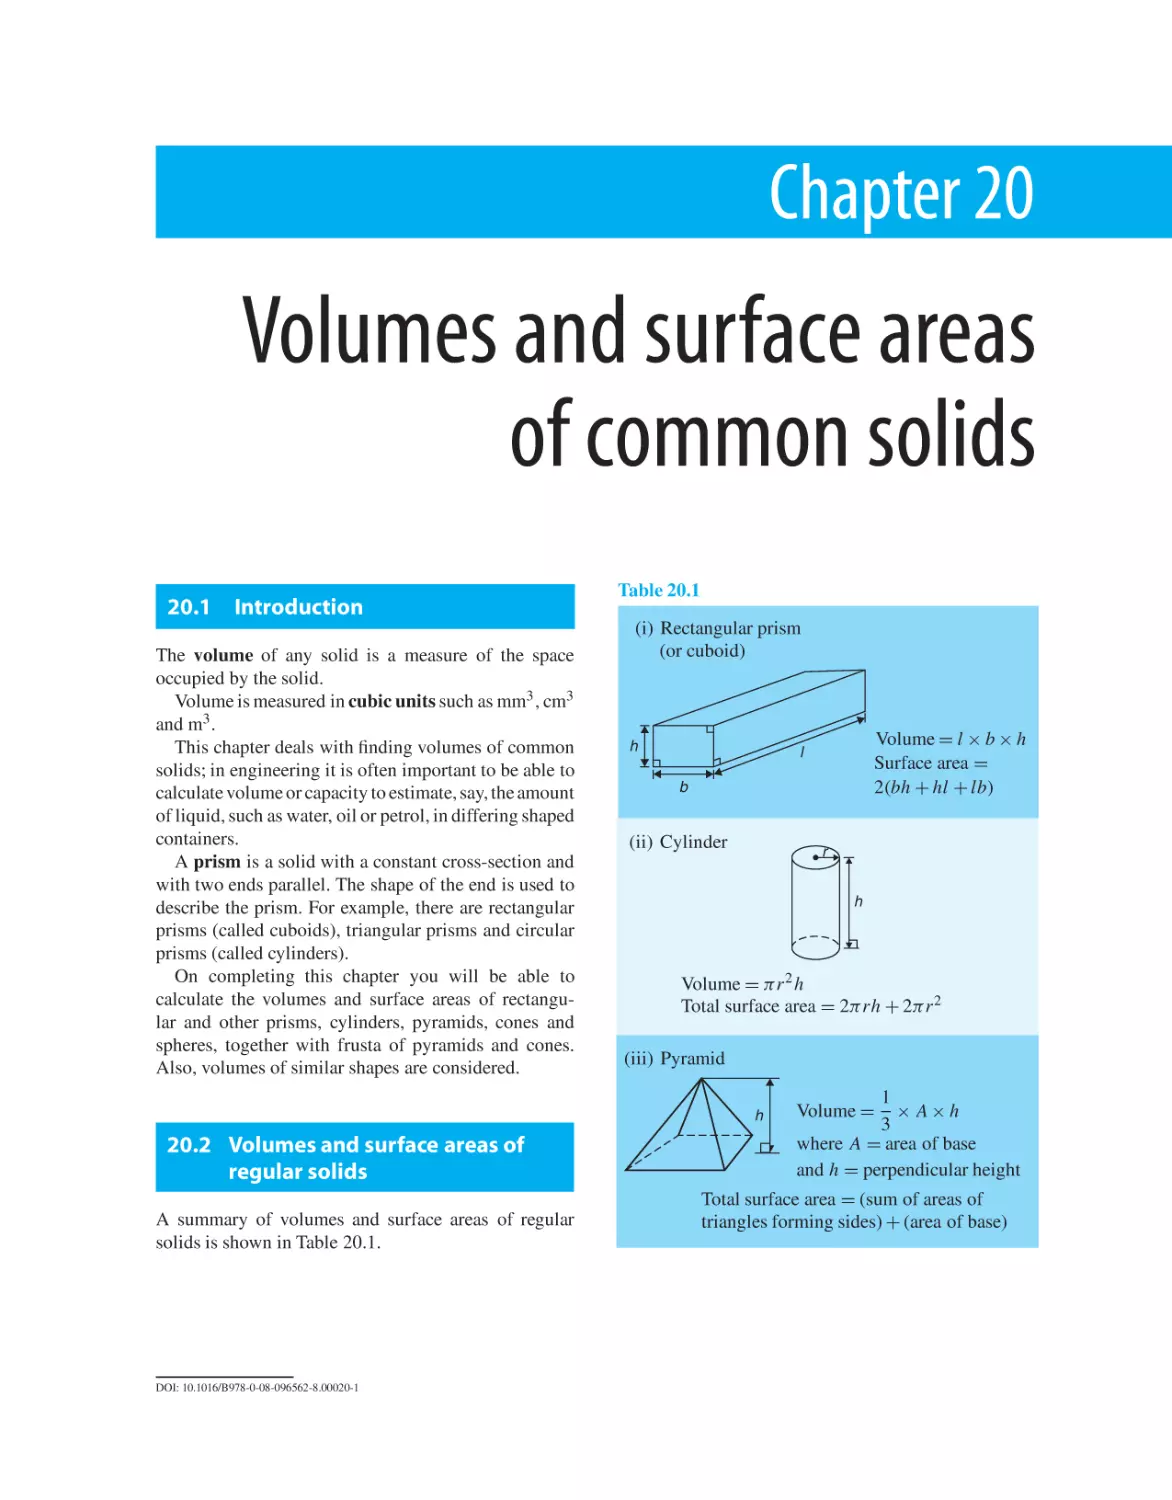 Chapter 20. Volumes and surface areas of common solids
20.1 Introduction
20.2 Volumes and surface areas of regular solids